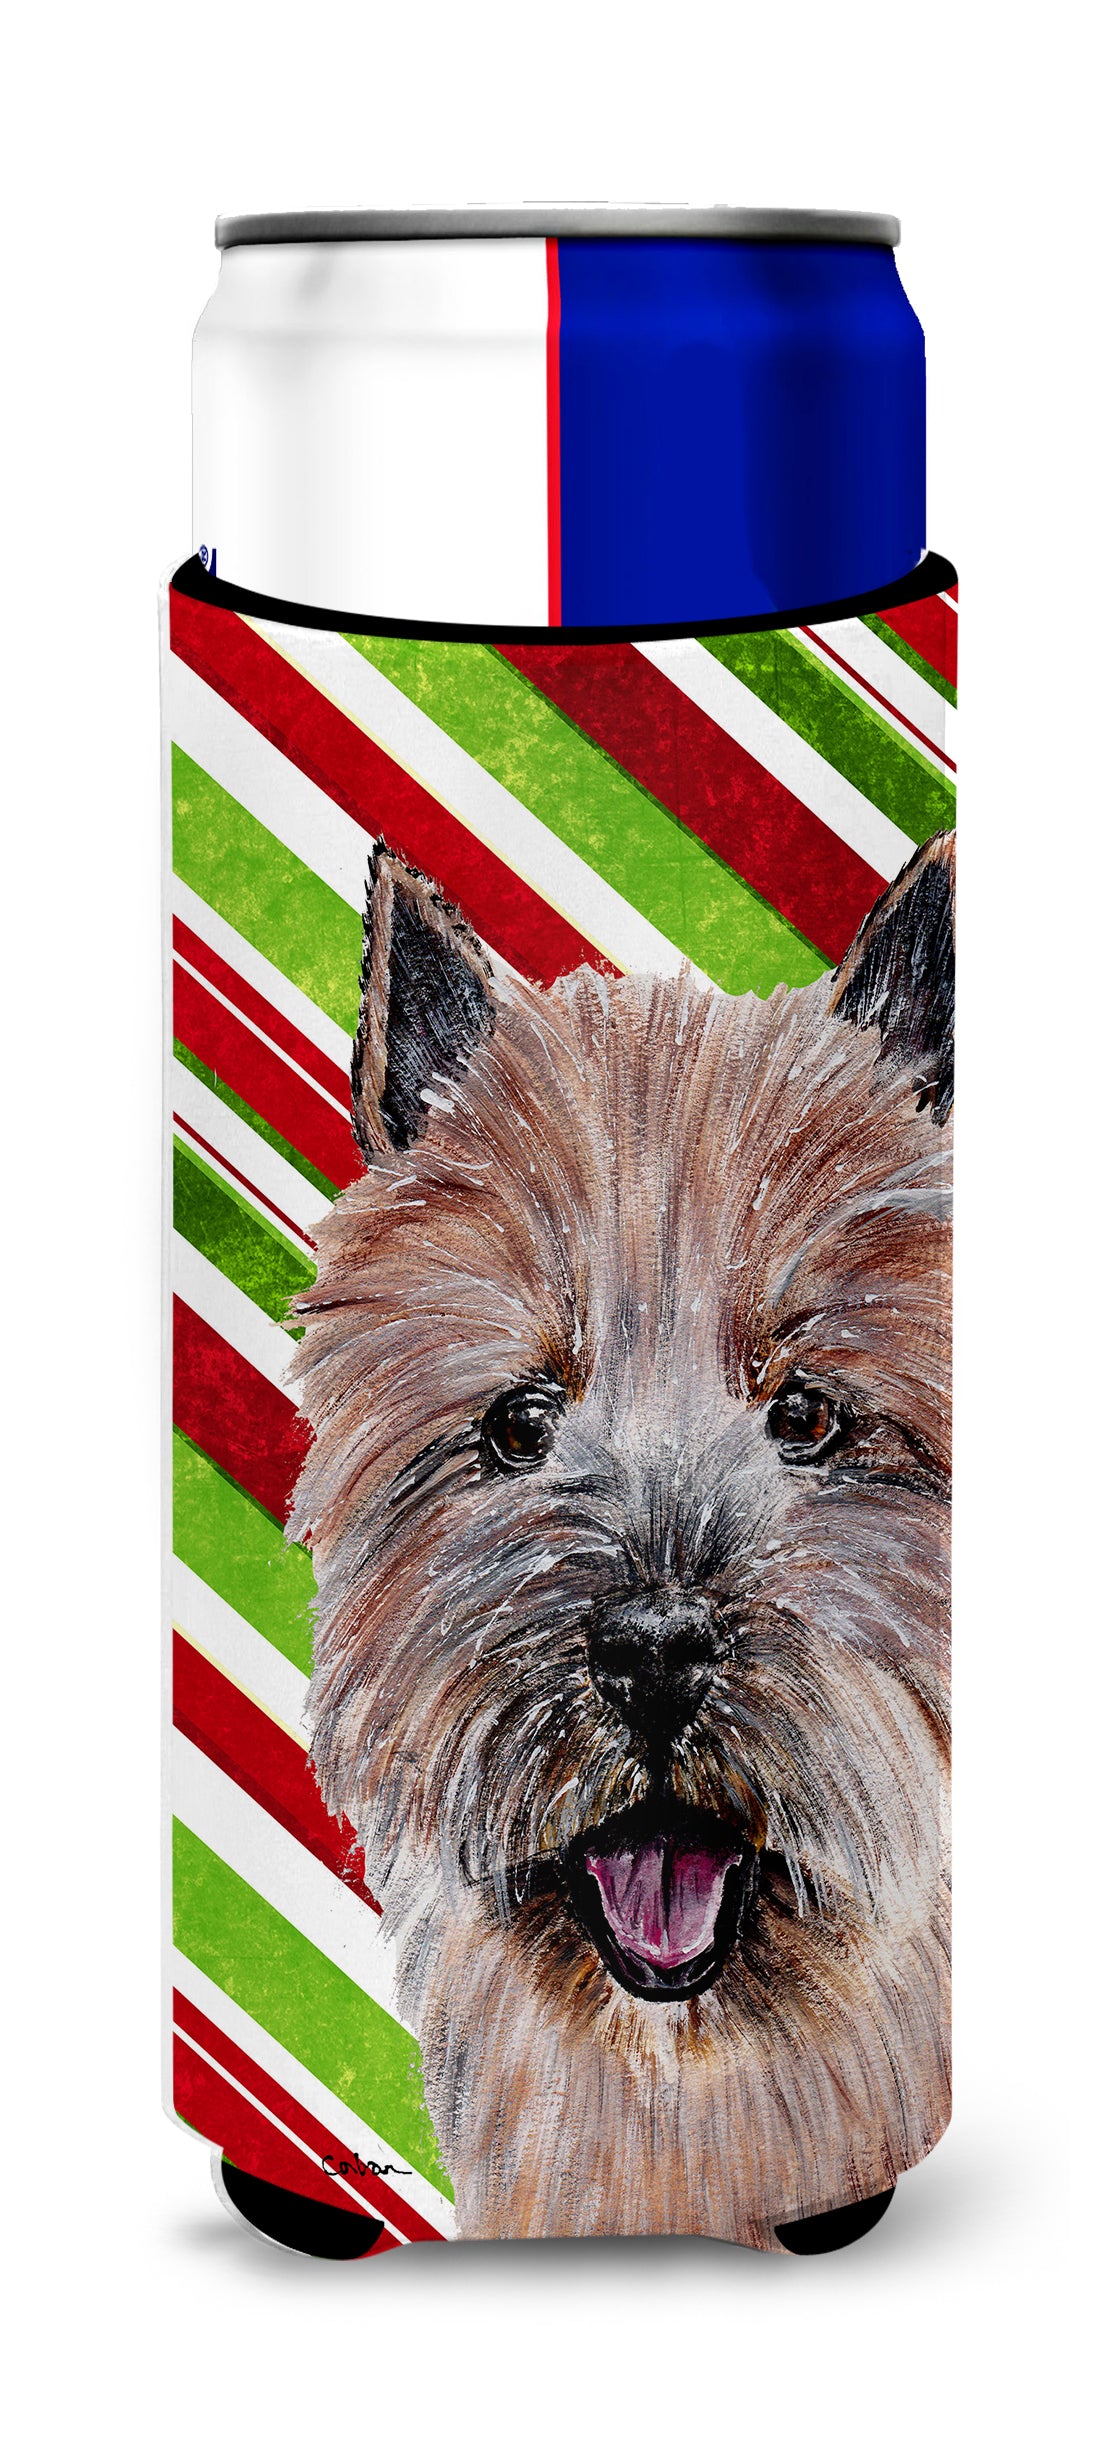 Norwich Terrier Candy Cane Christmas Ultra Beverage Insulators for slim cans SC9806MUK